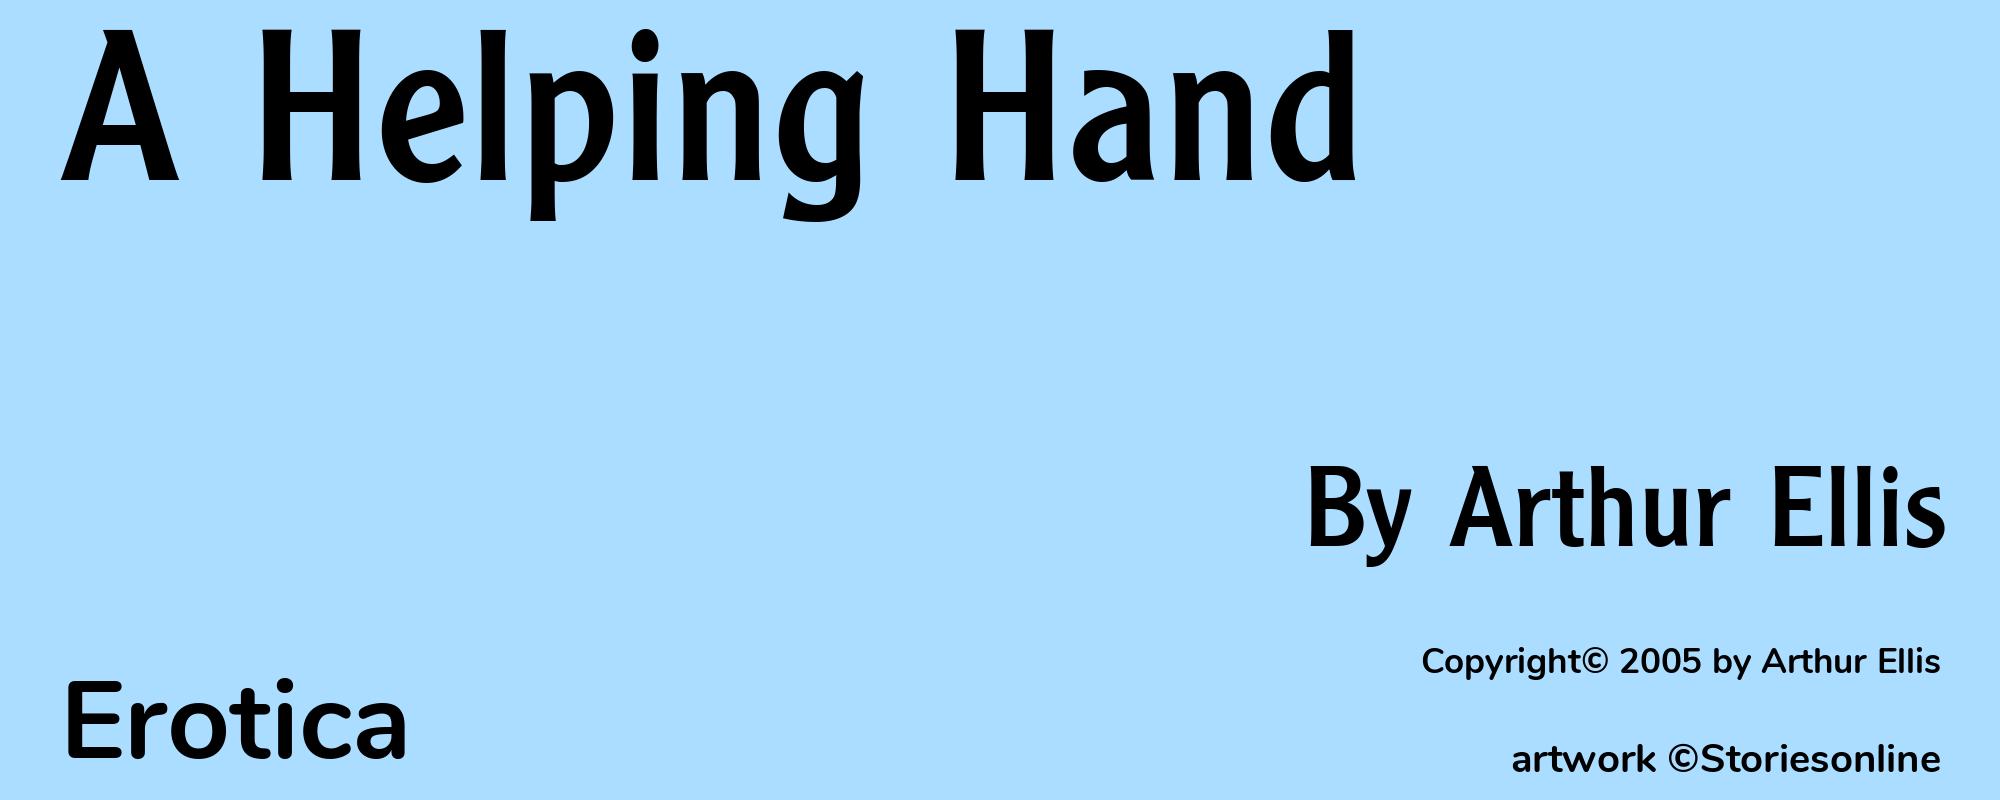 A Helping Hand - Cover